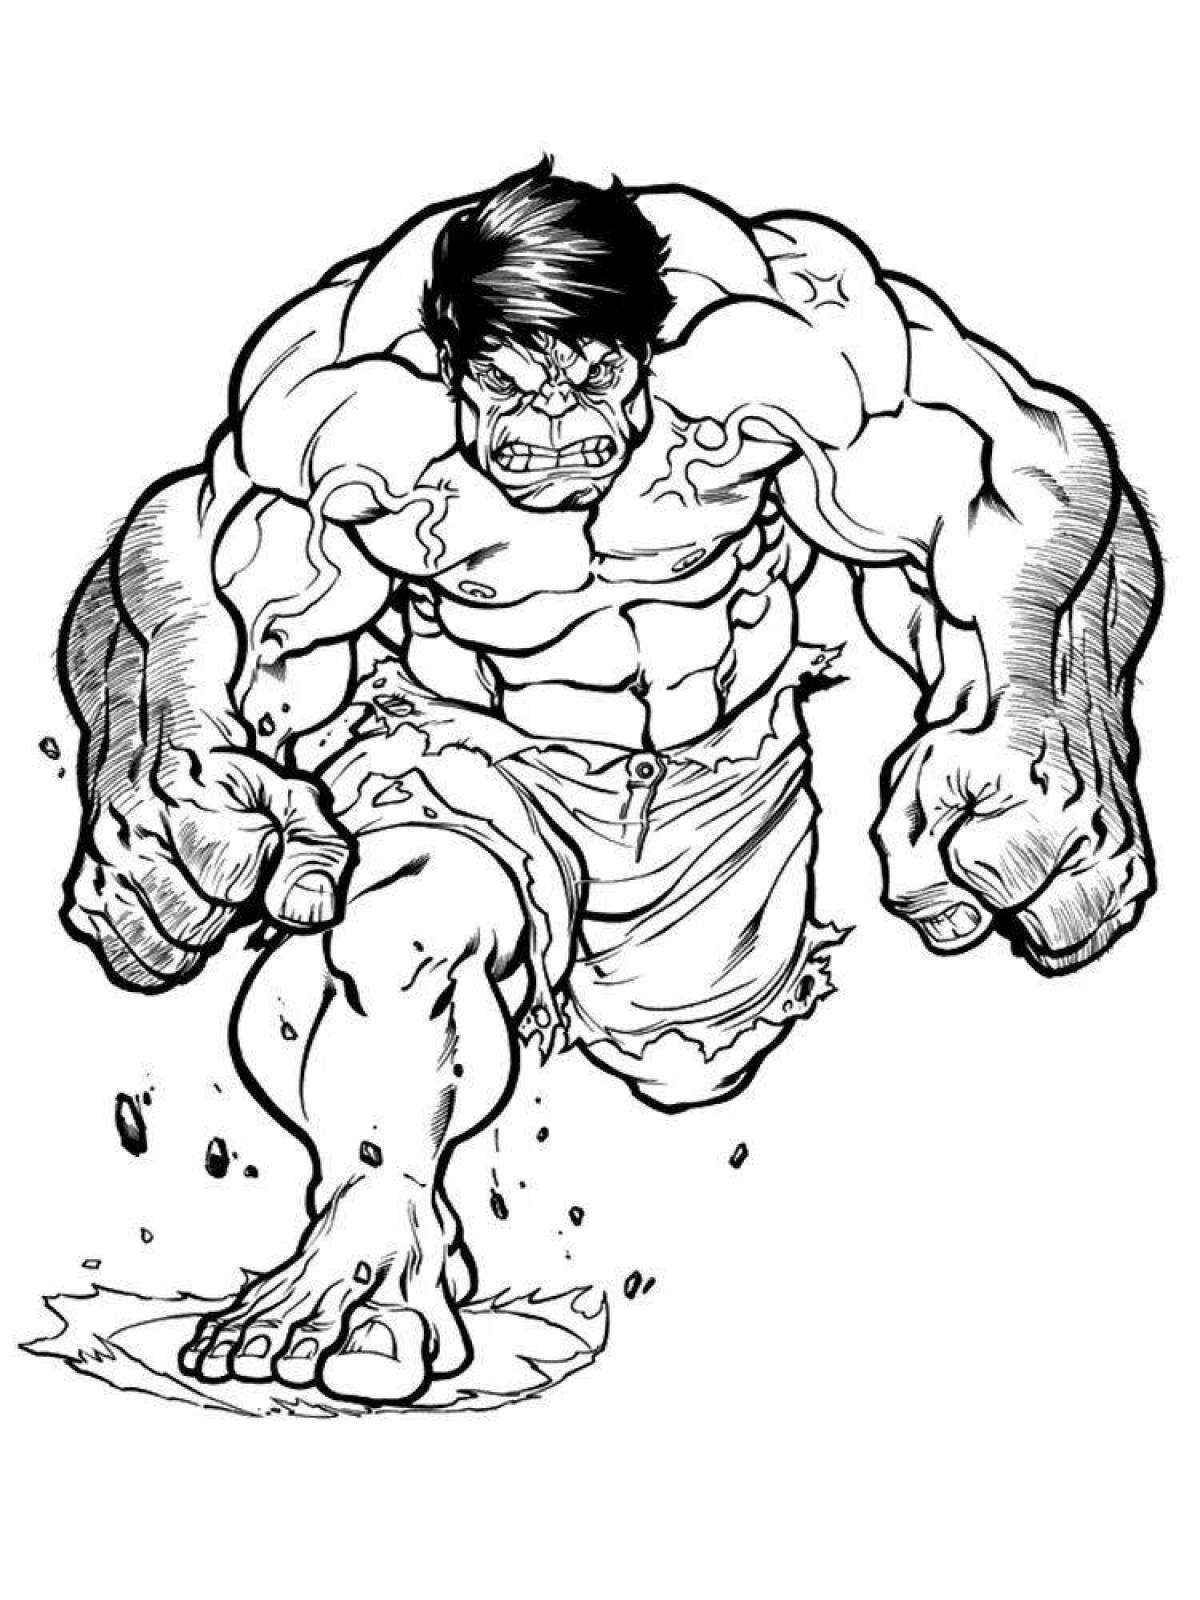 Exquisite red hulk coloring book